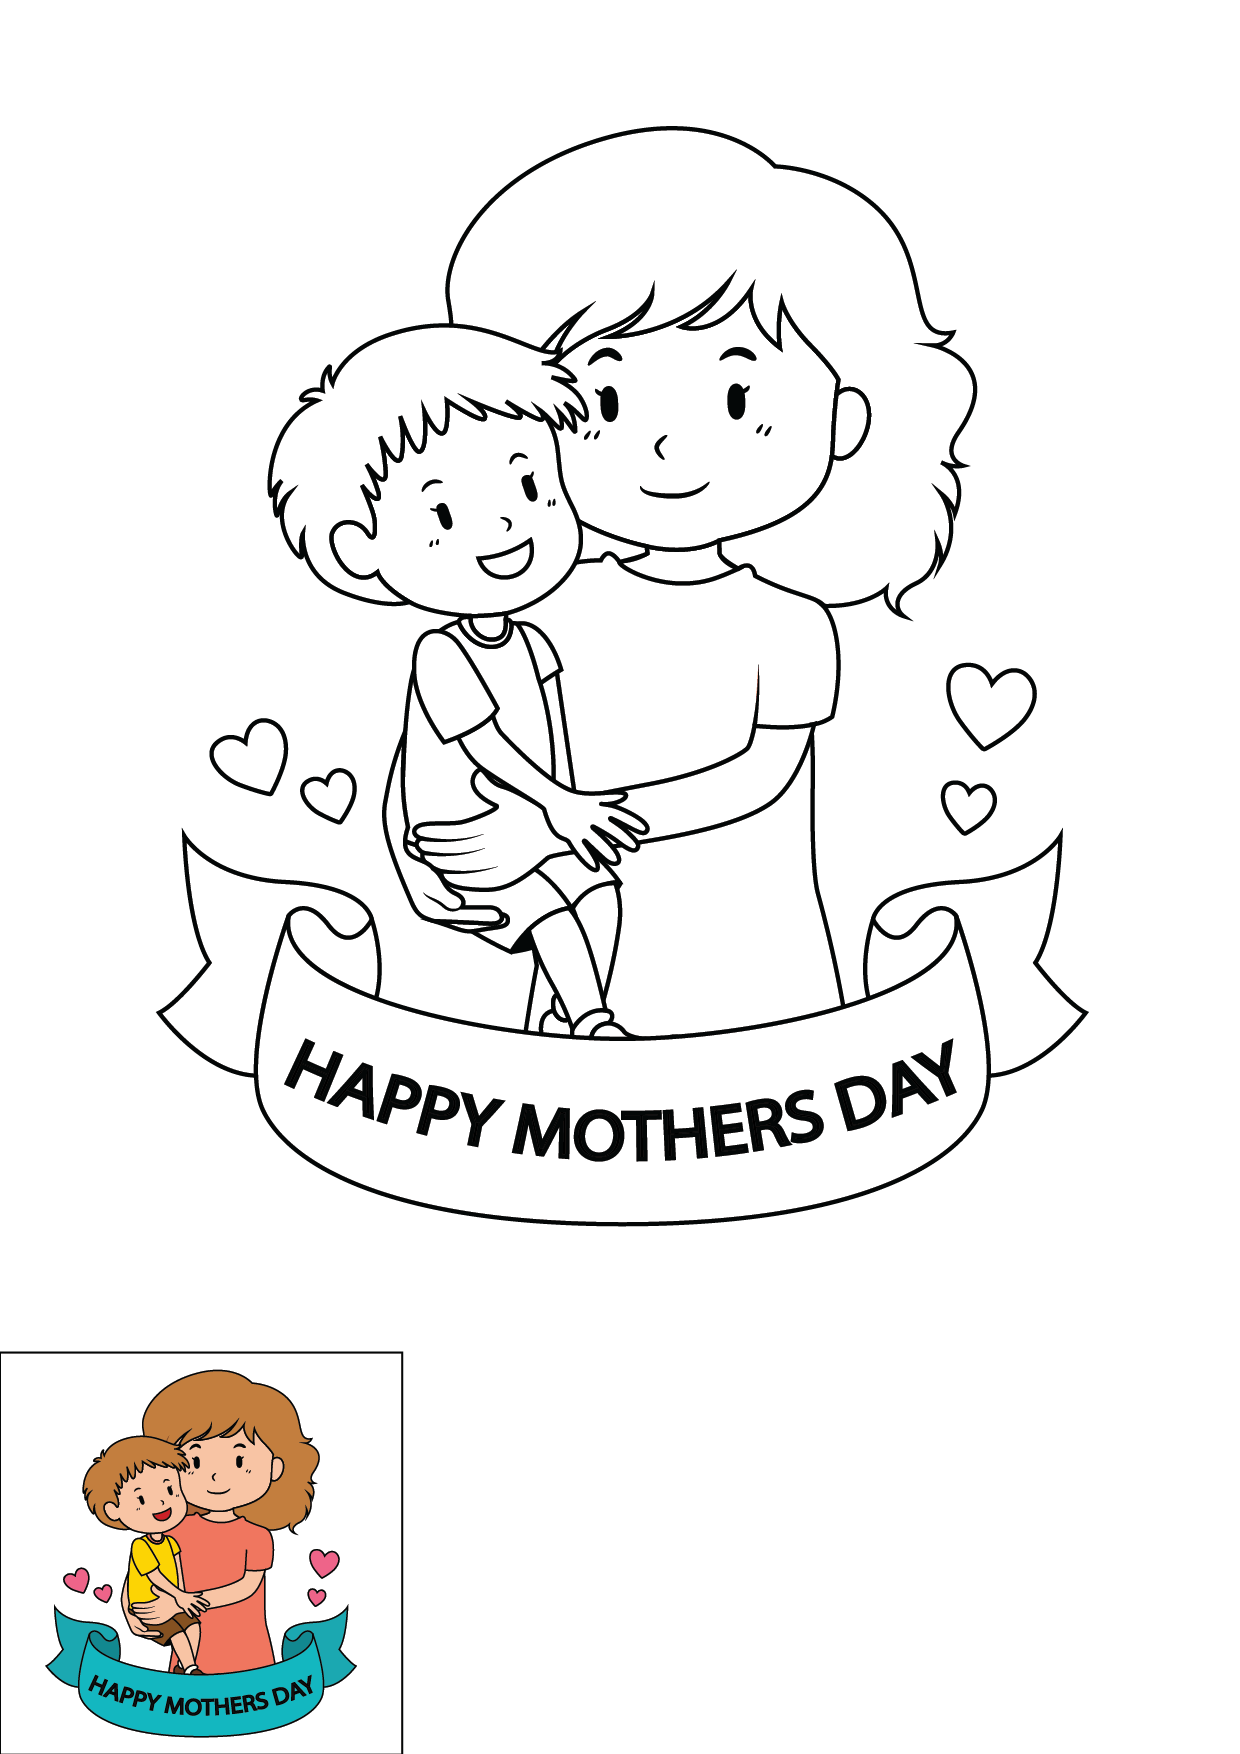 How to Draw A Mothers Day Step by Step Printable Color